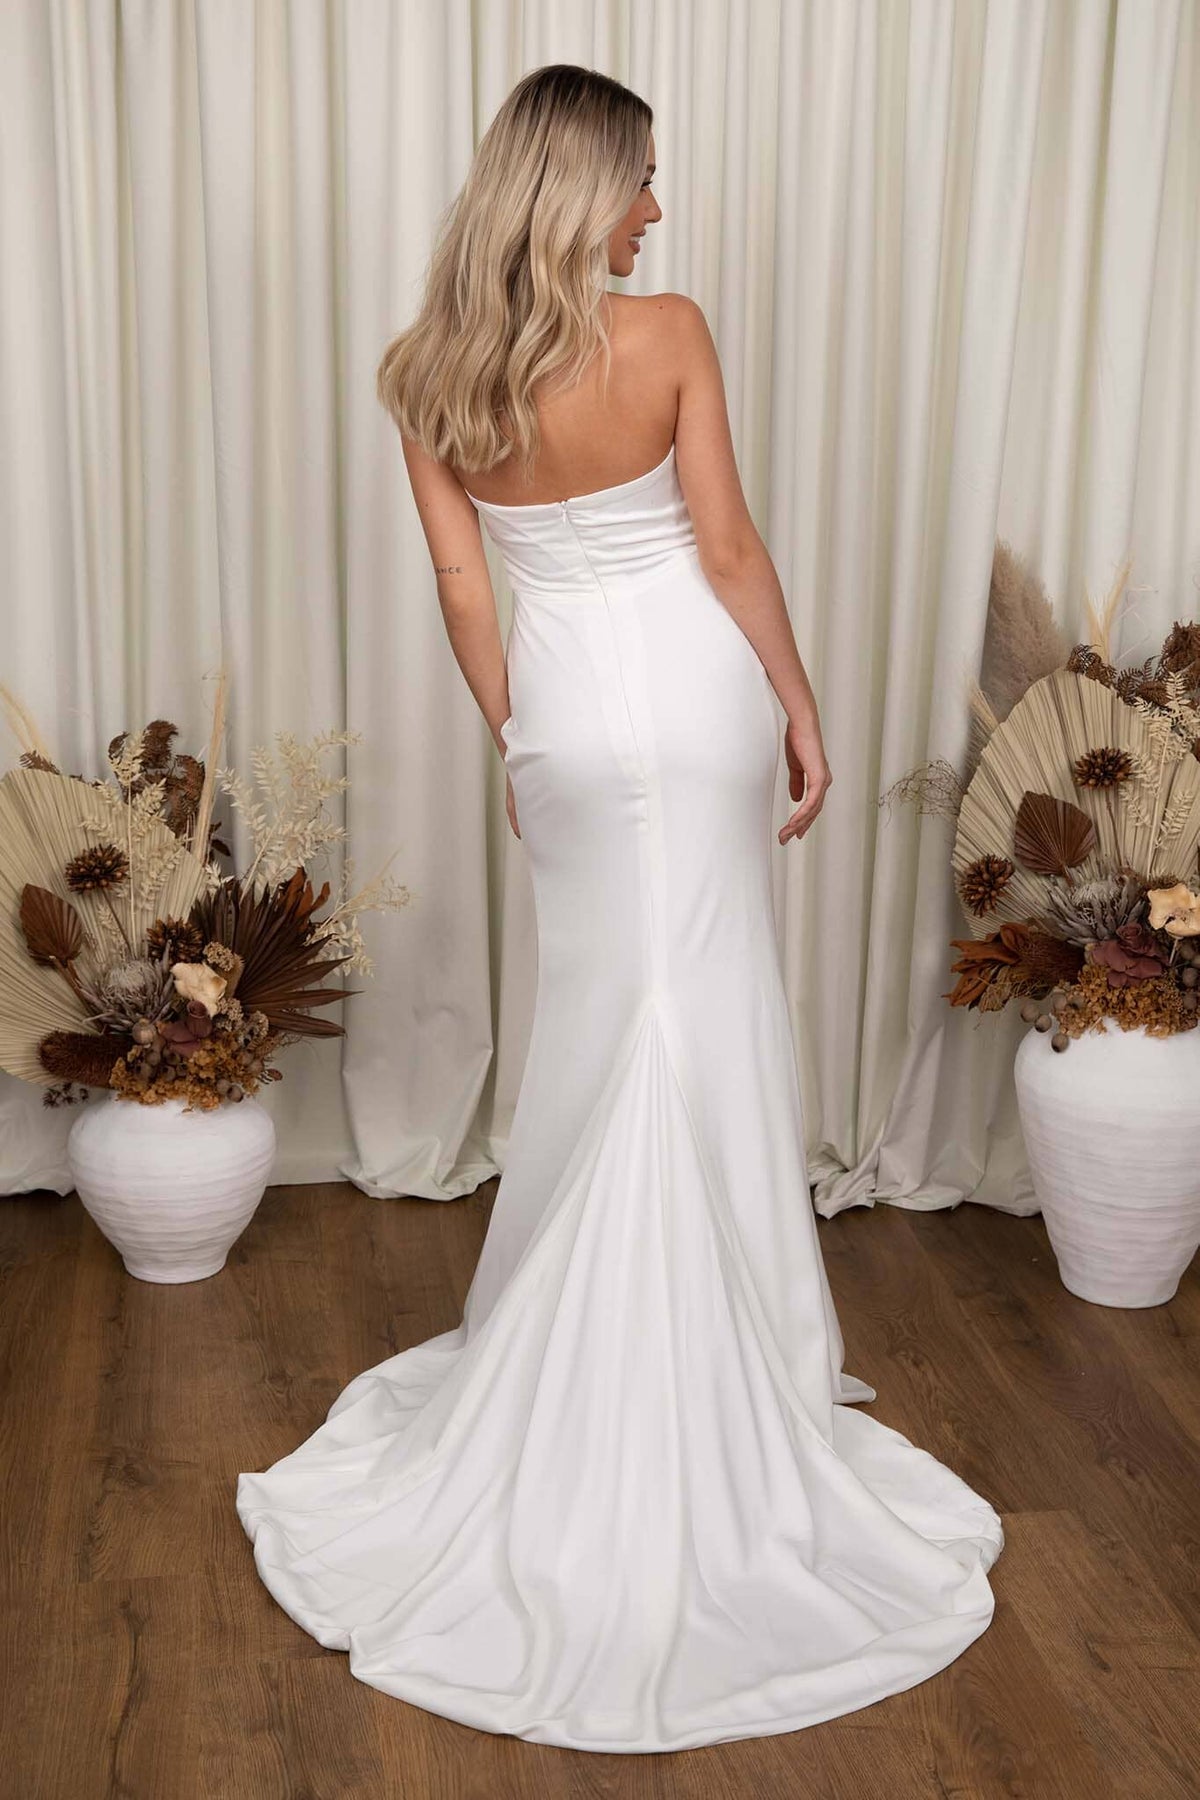 Back Image of Ivory White Fit and Flare Wedding Gown with Sweetheart Strapless Bodice and Gathered Draping Detail